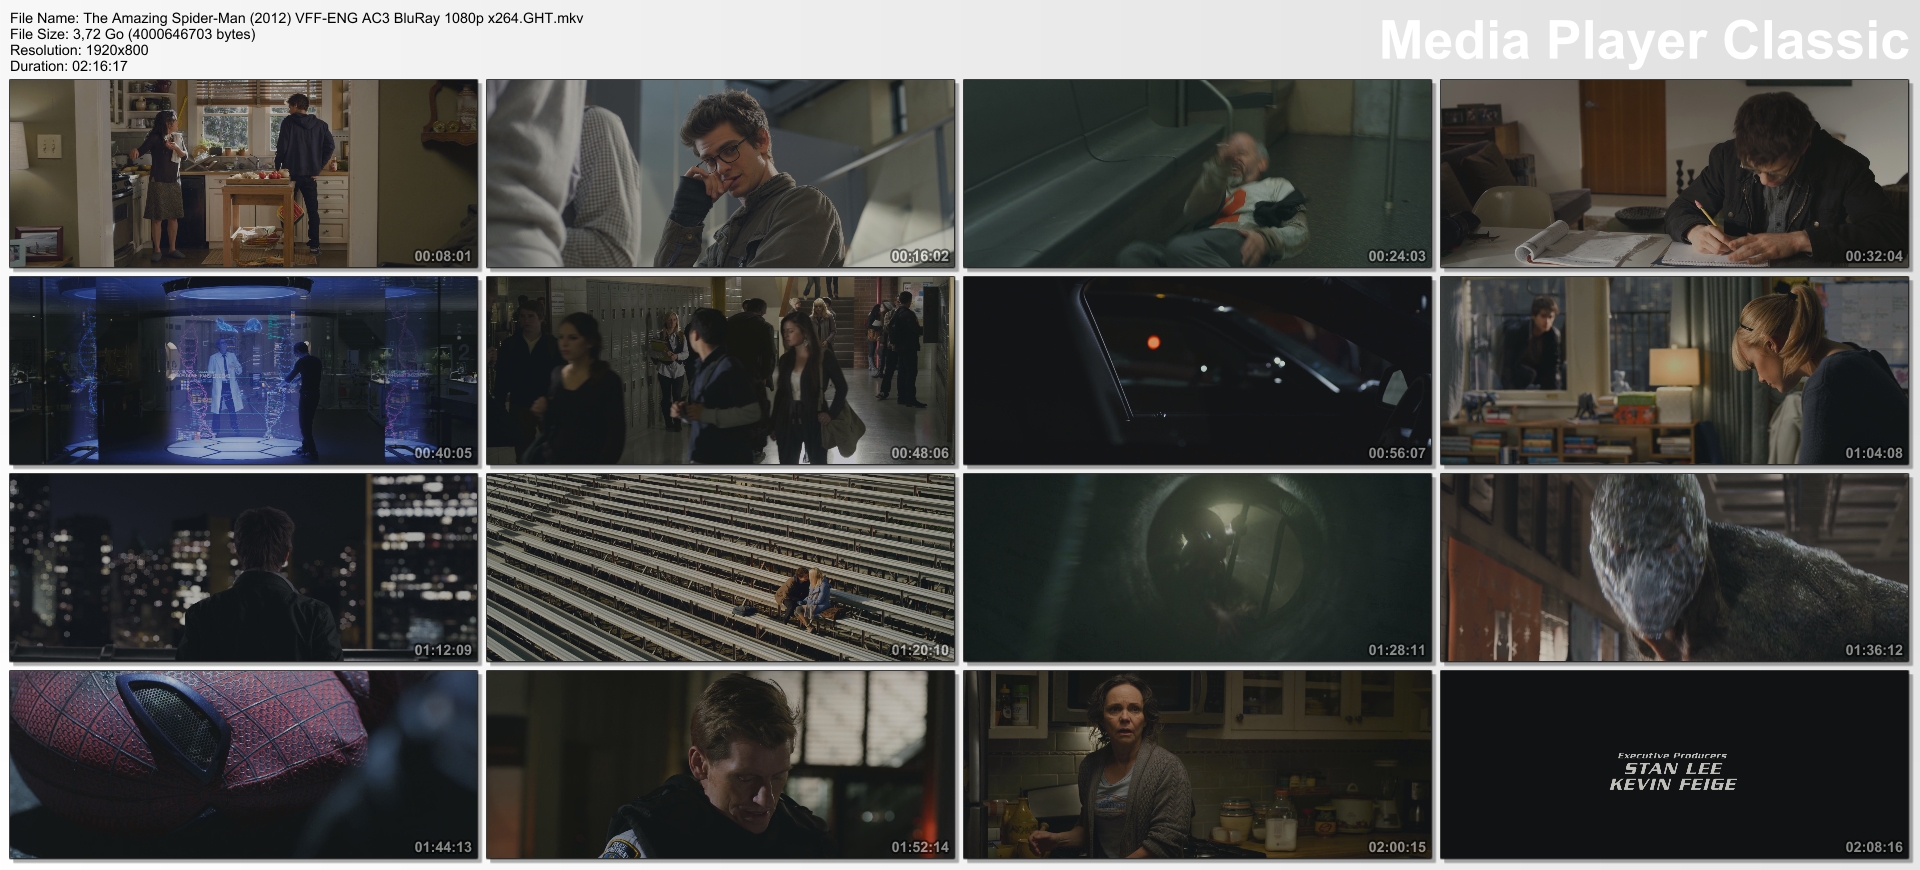 The Amazing Spider-Man (2012) VFF-ENG AC3 BluRay 1080p x264